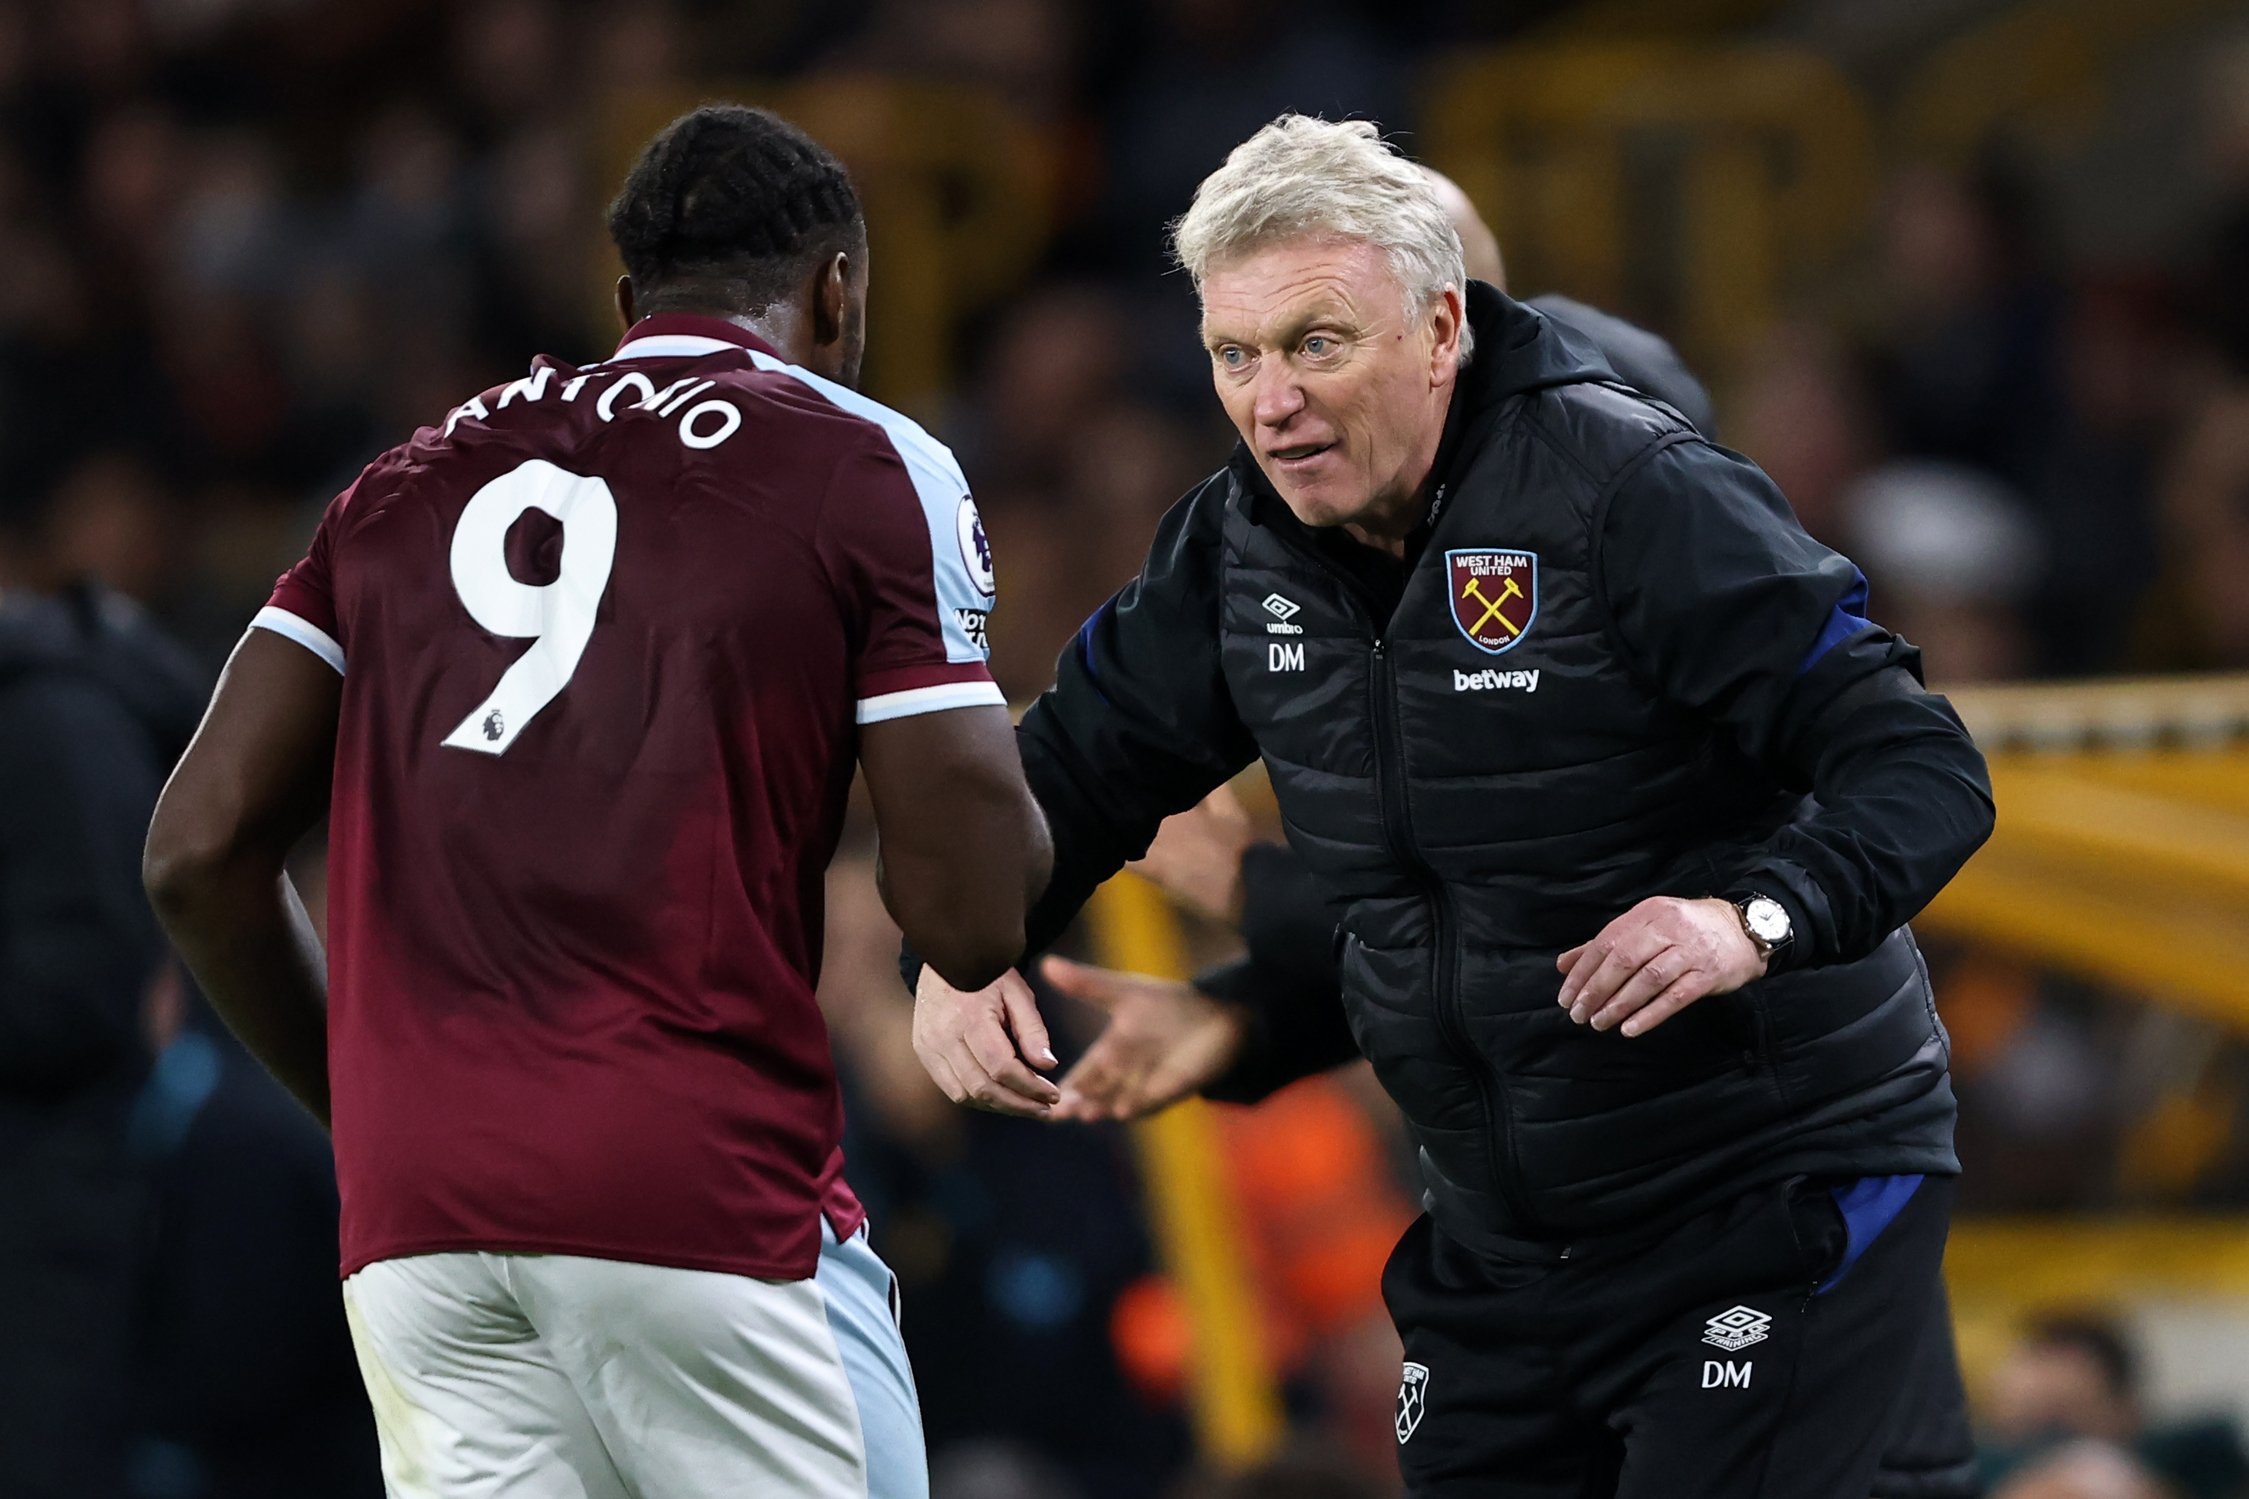 Struggling Michail Antonio sends passionate message to David Moyes and West Ham fans about his role